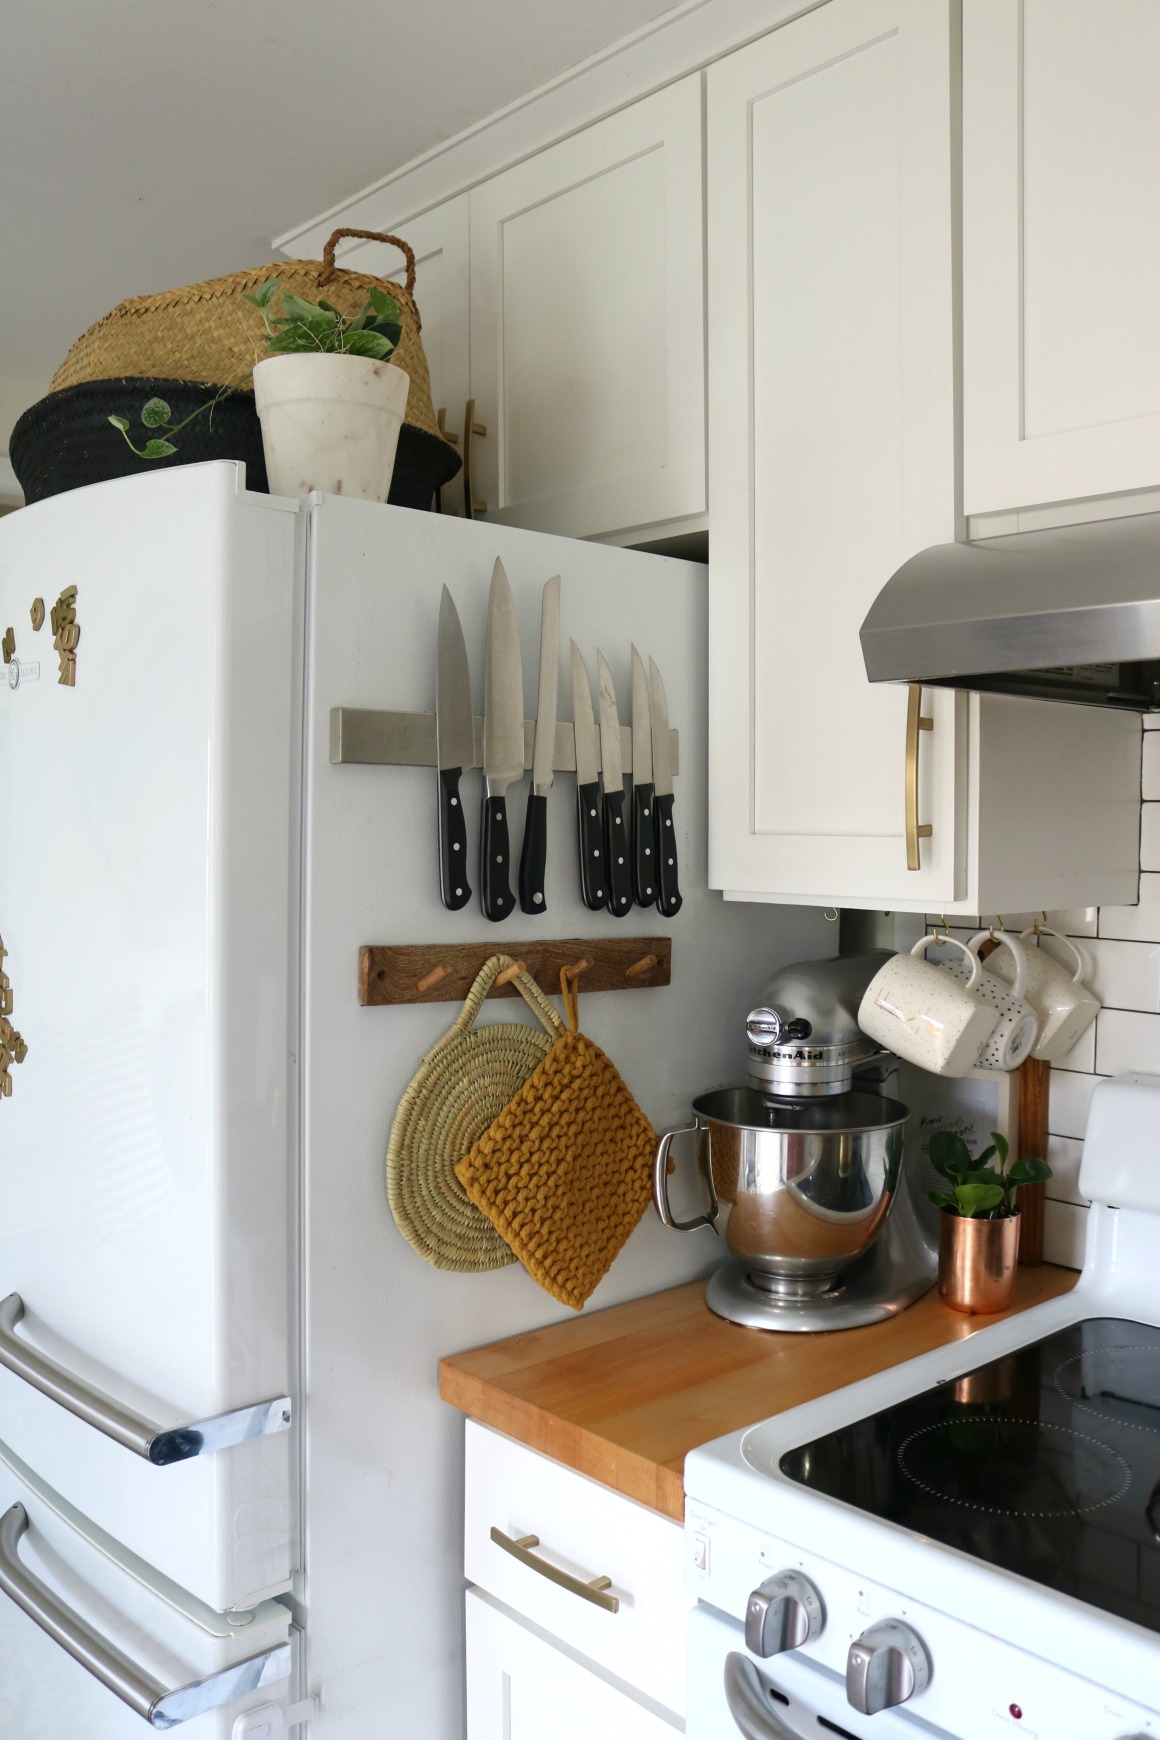 Favorite Kitchen Items- Where to get for Best Prices - Nesting